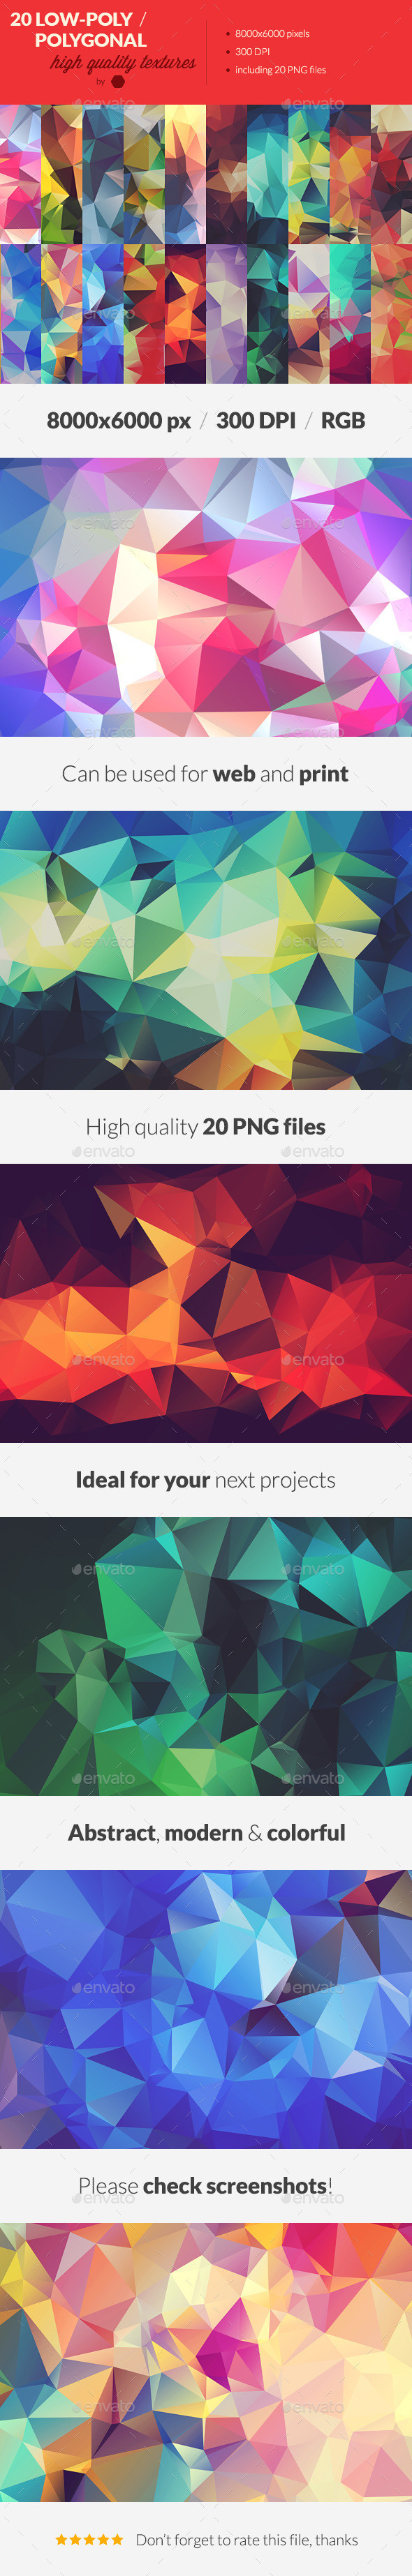 20 low poly polygonal geometrical triangular textures backgrounds